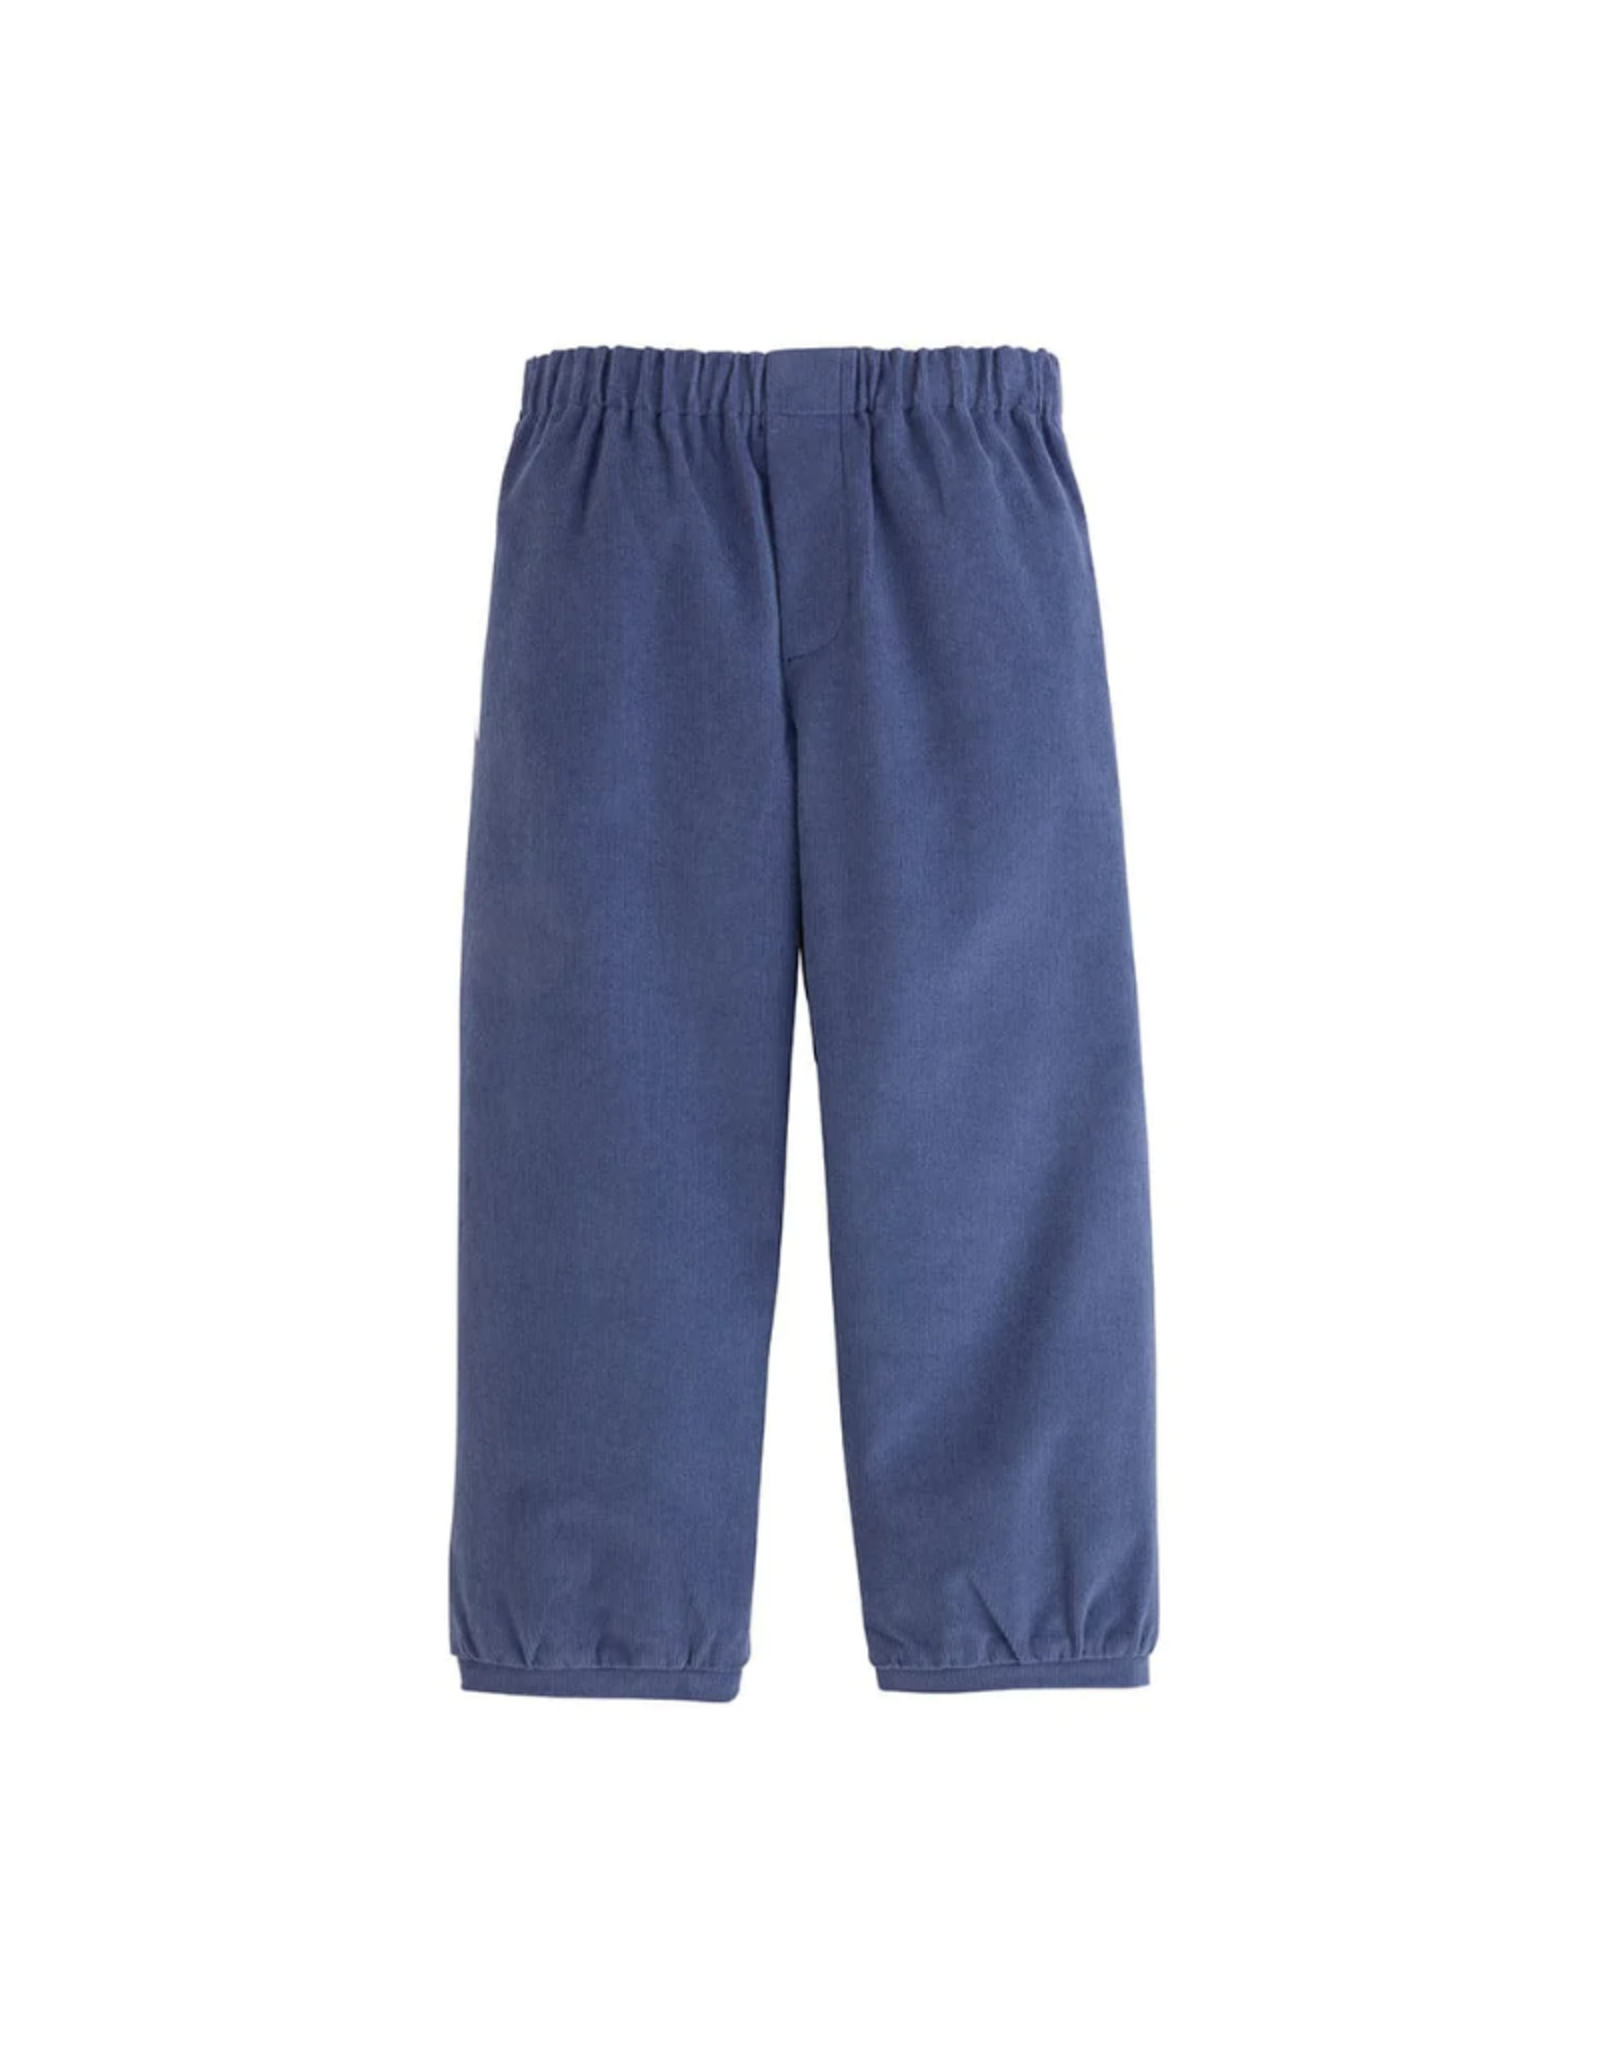 Little English Banded Pull On Pant - Blue Gray Corduroy